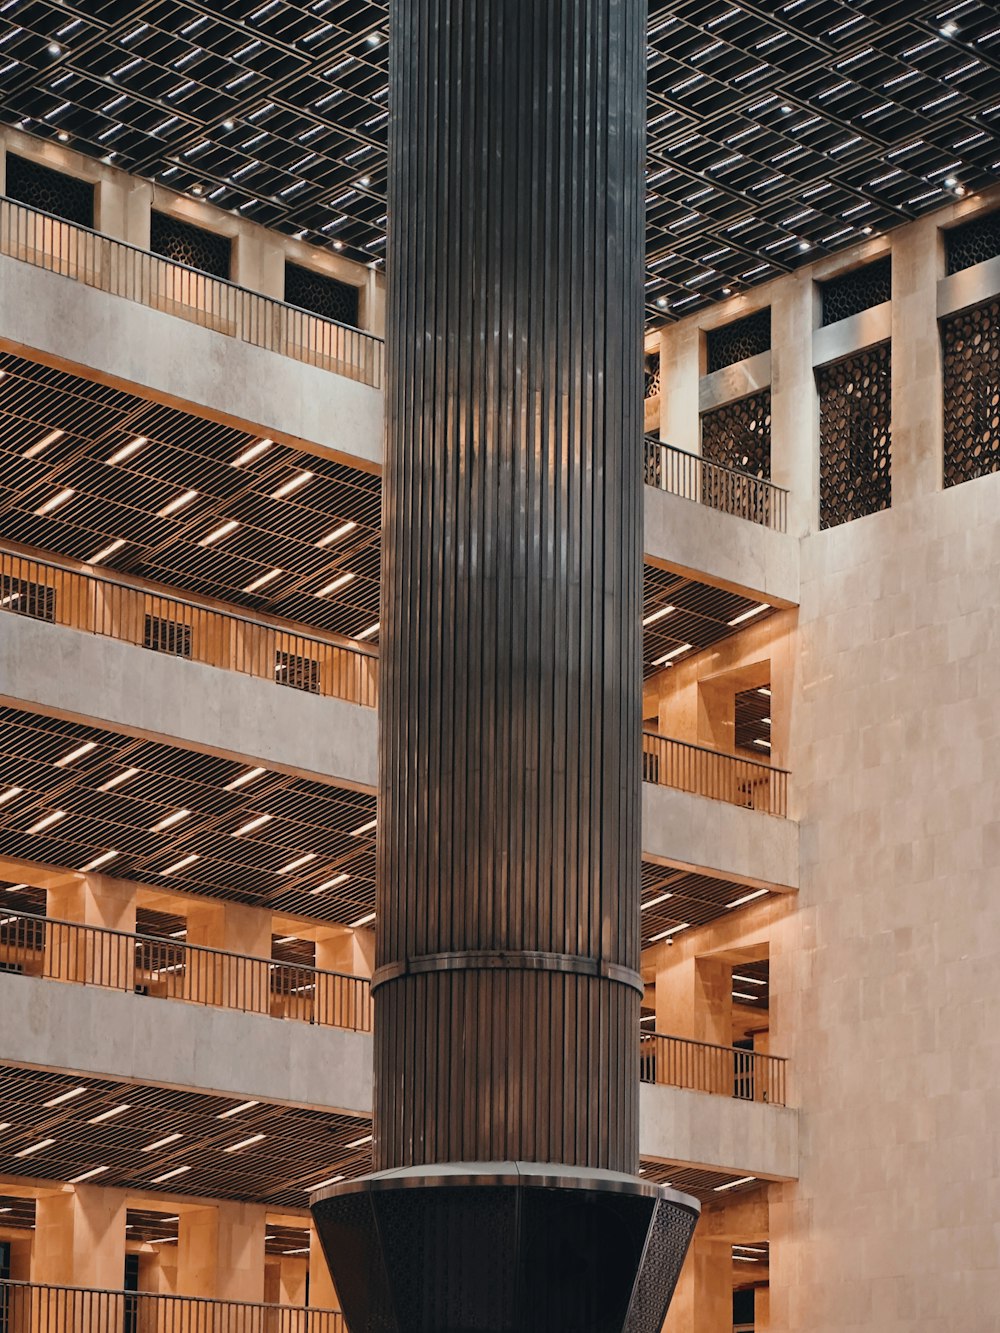 a large pillar in the middle of a building